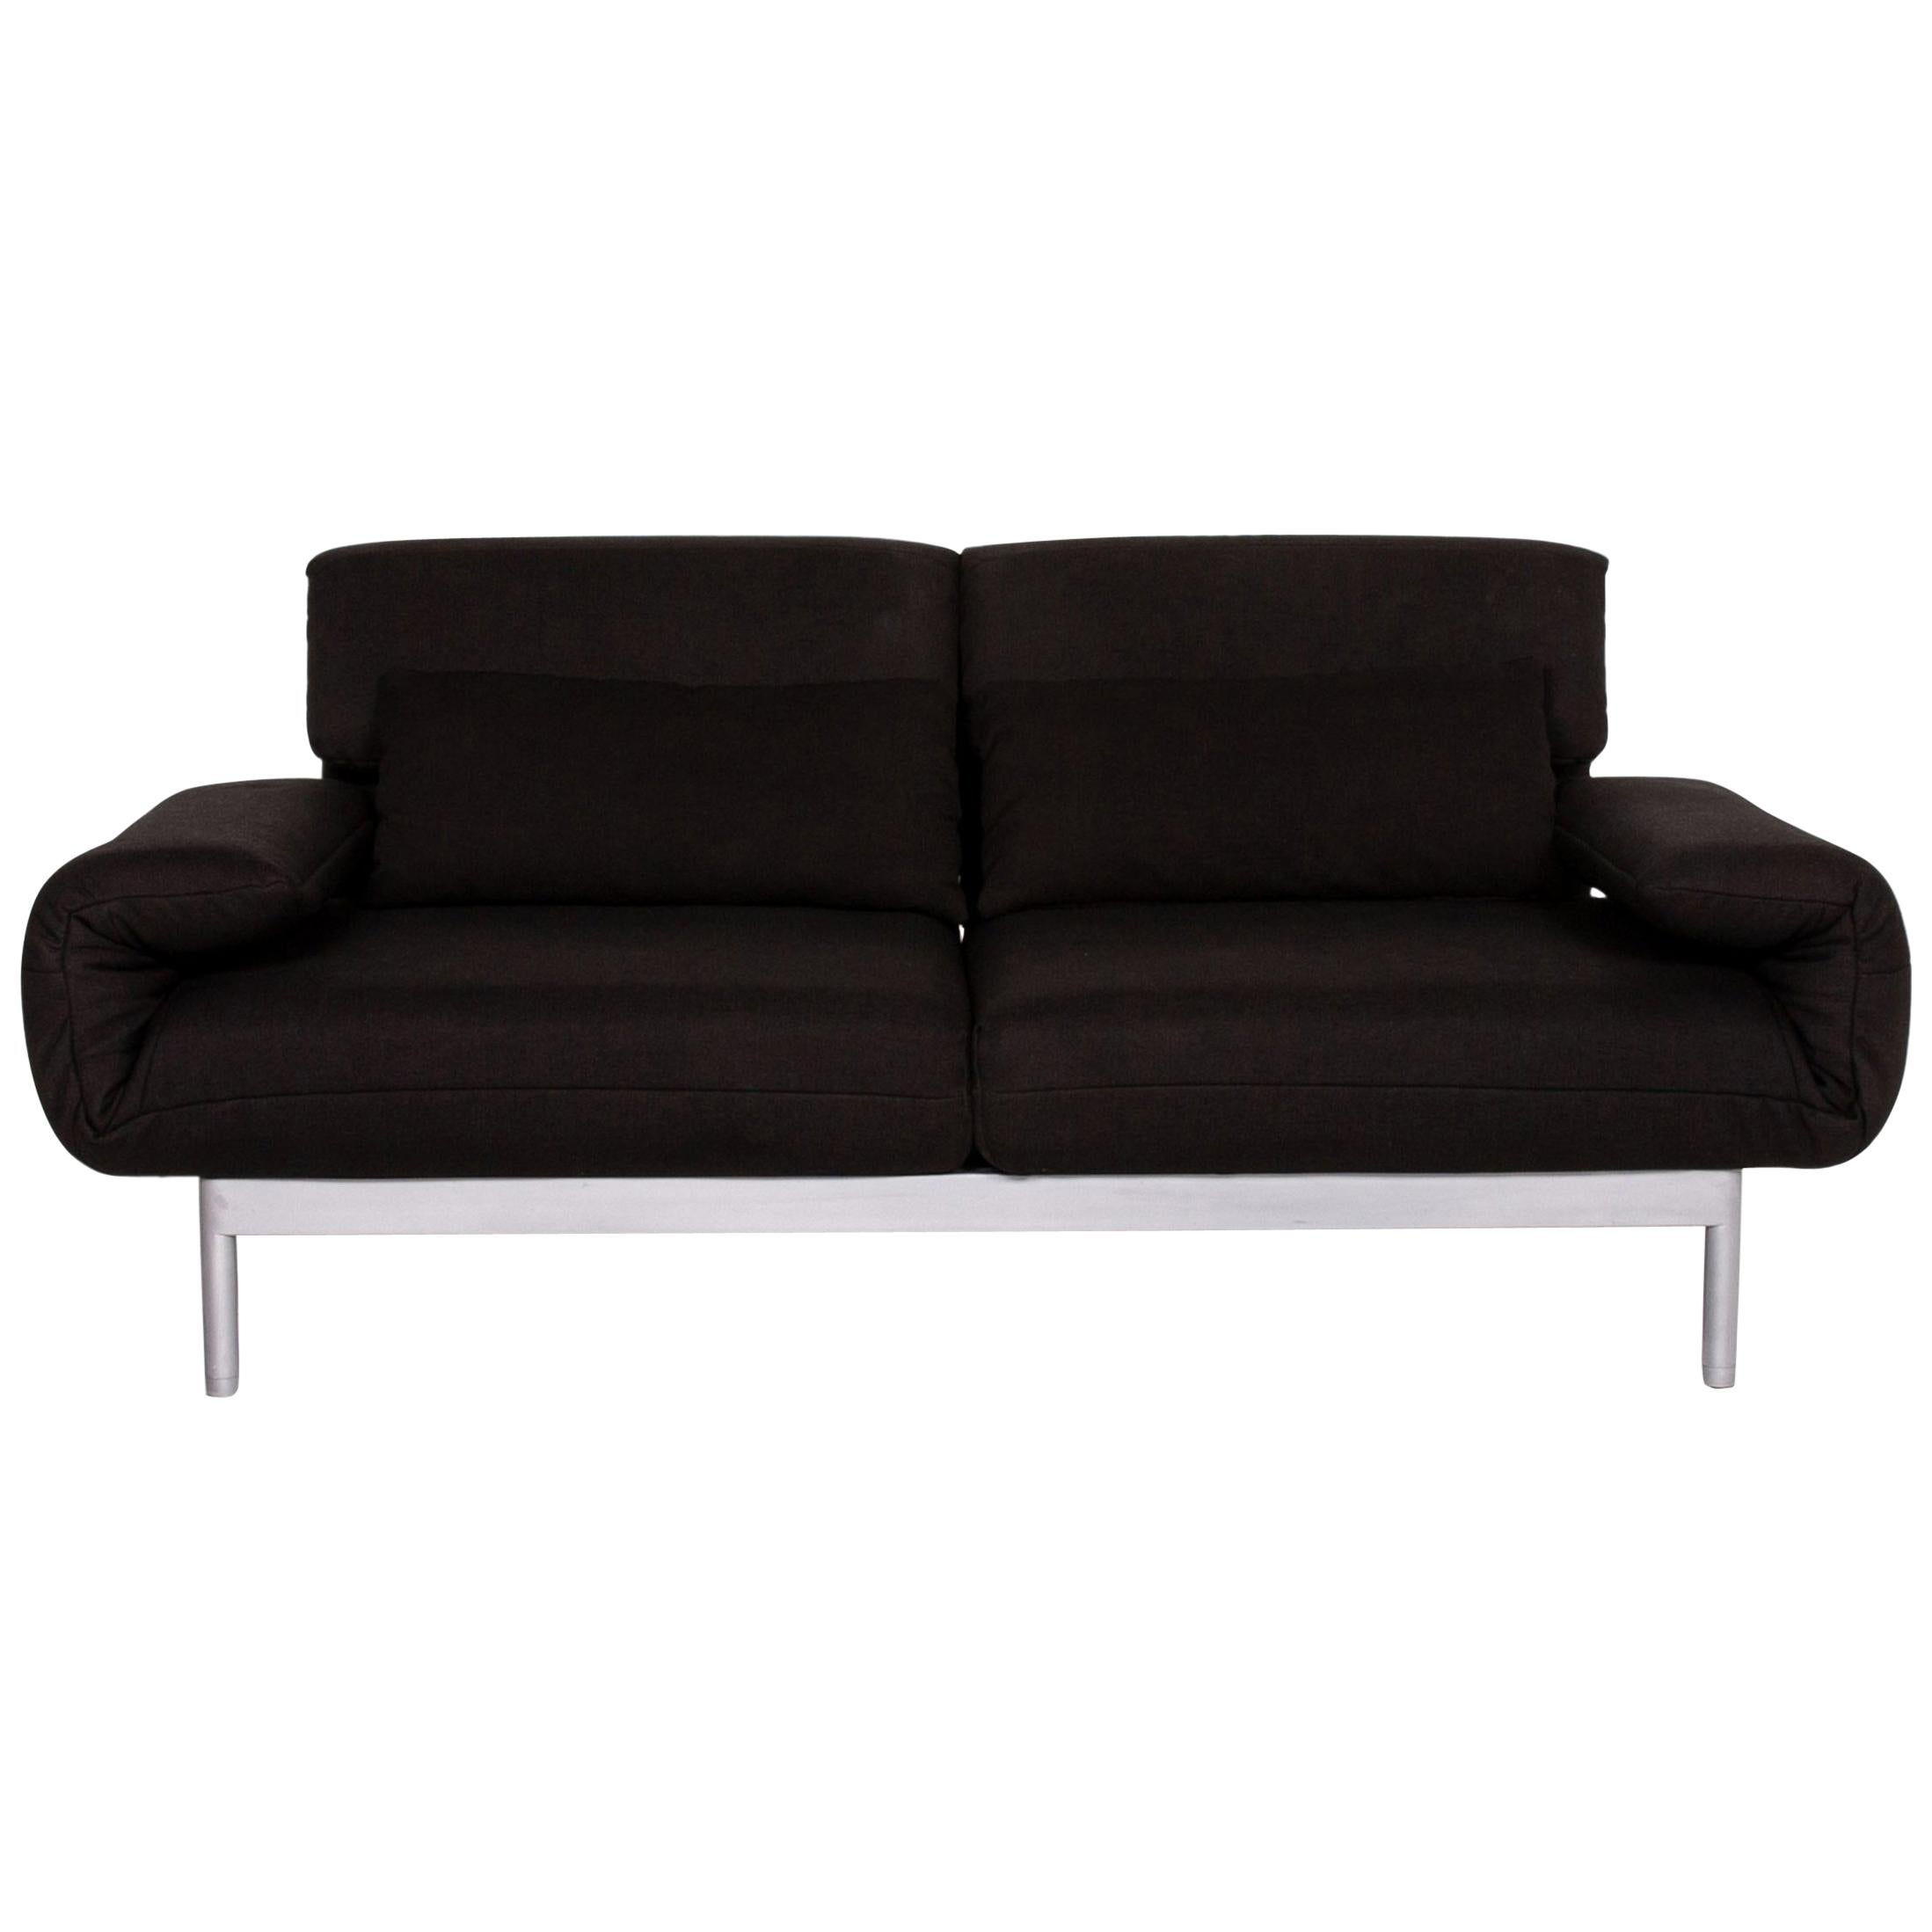 Rolf Benz Plura Fabric Sofa Black Two-Seat Function Relax Function Couch